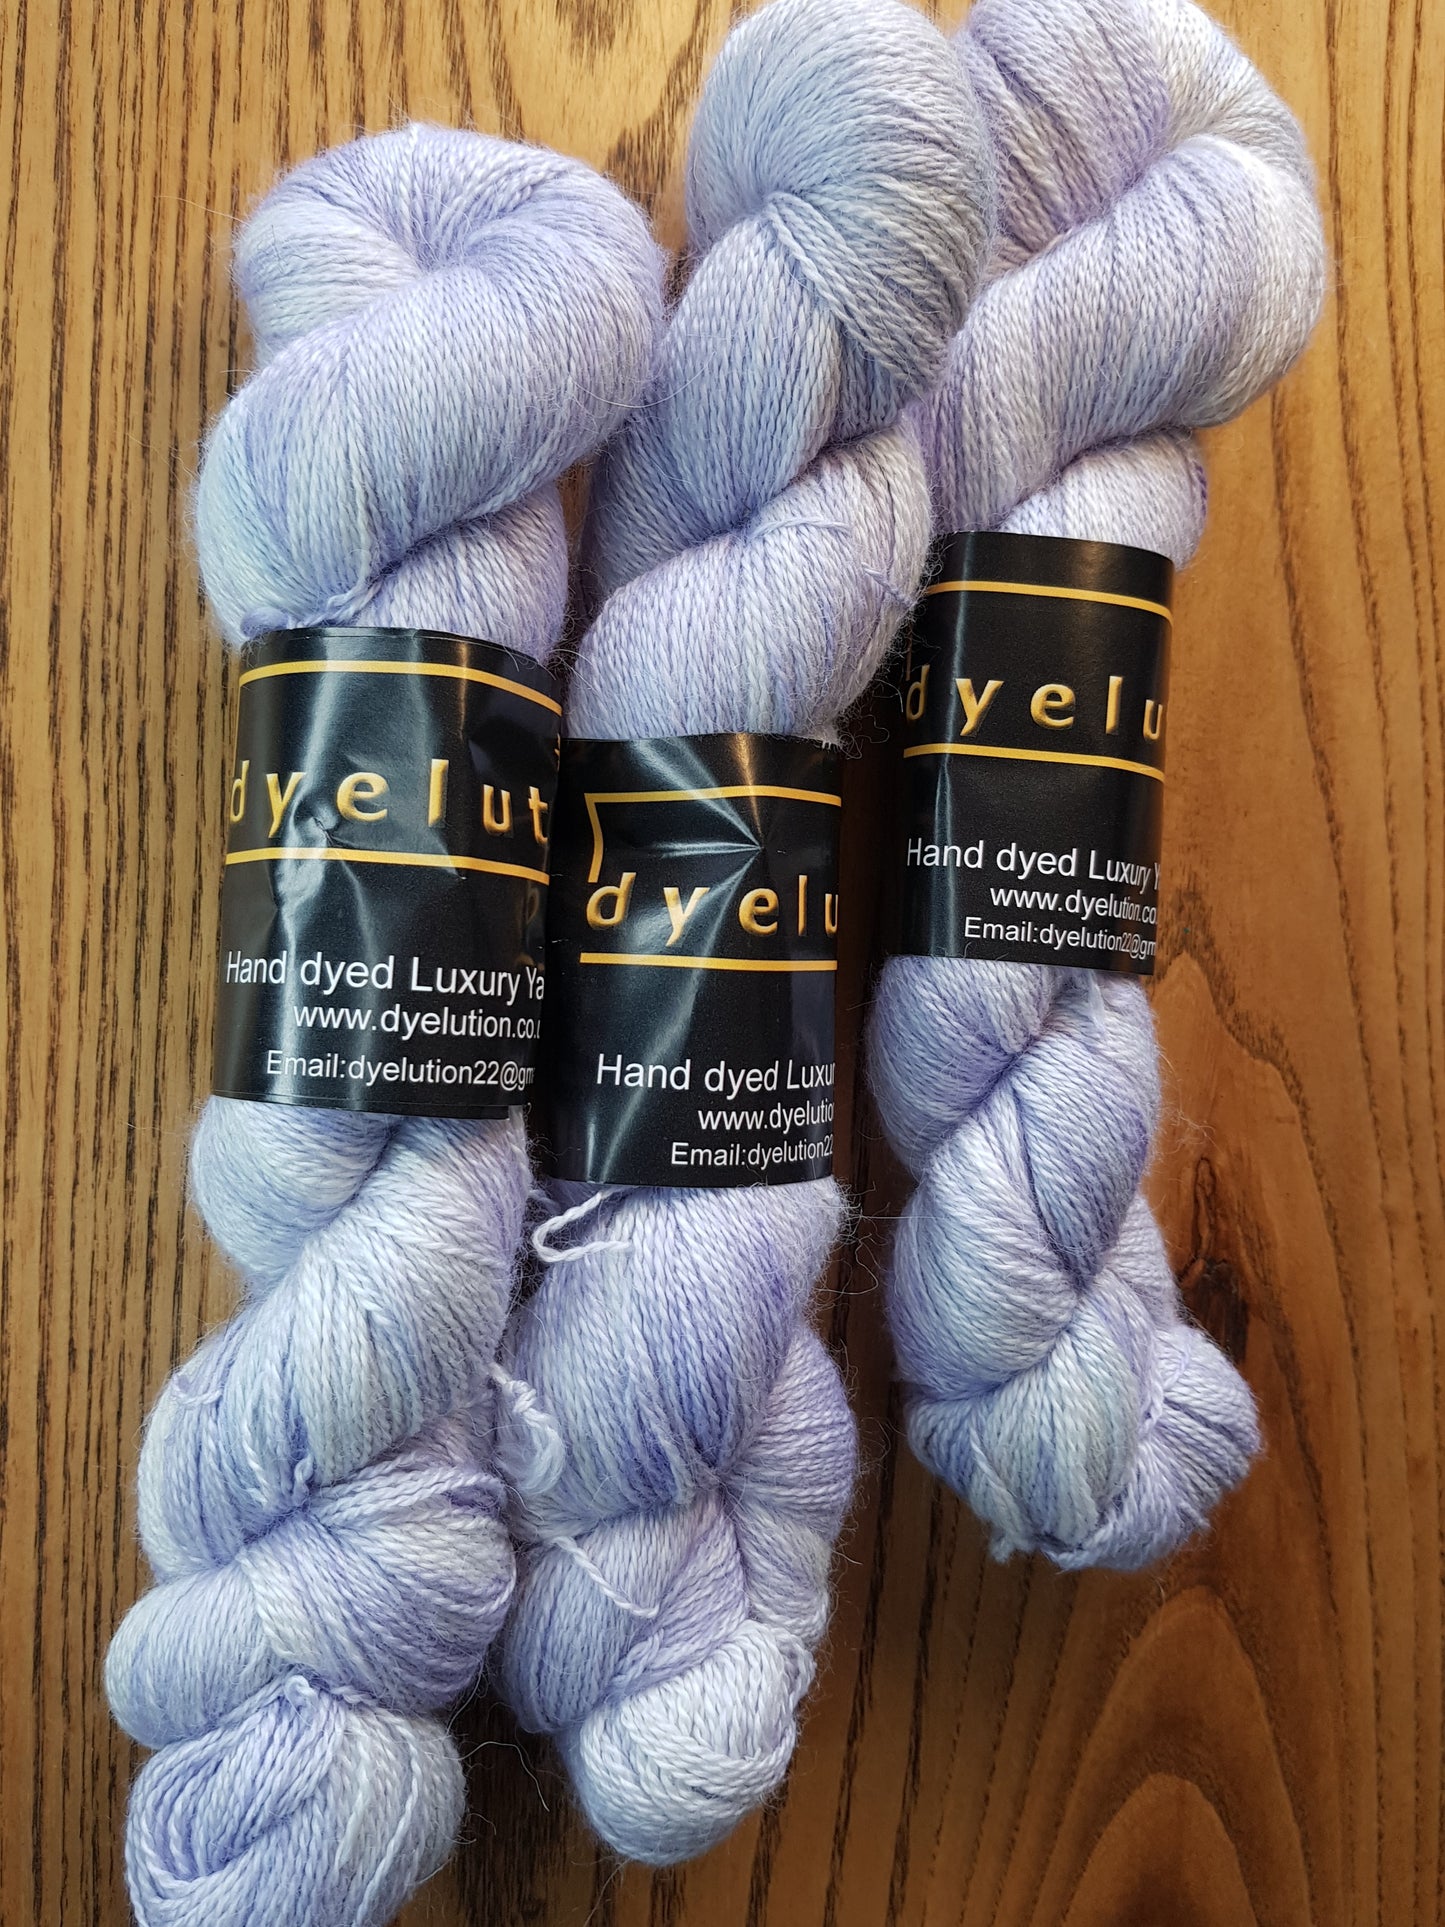 100G BFL/Silk hand dyed Lace Weight Yarn- "A Touch of Frost" - *SALE*